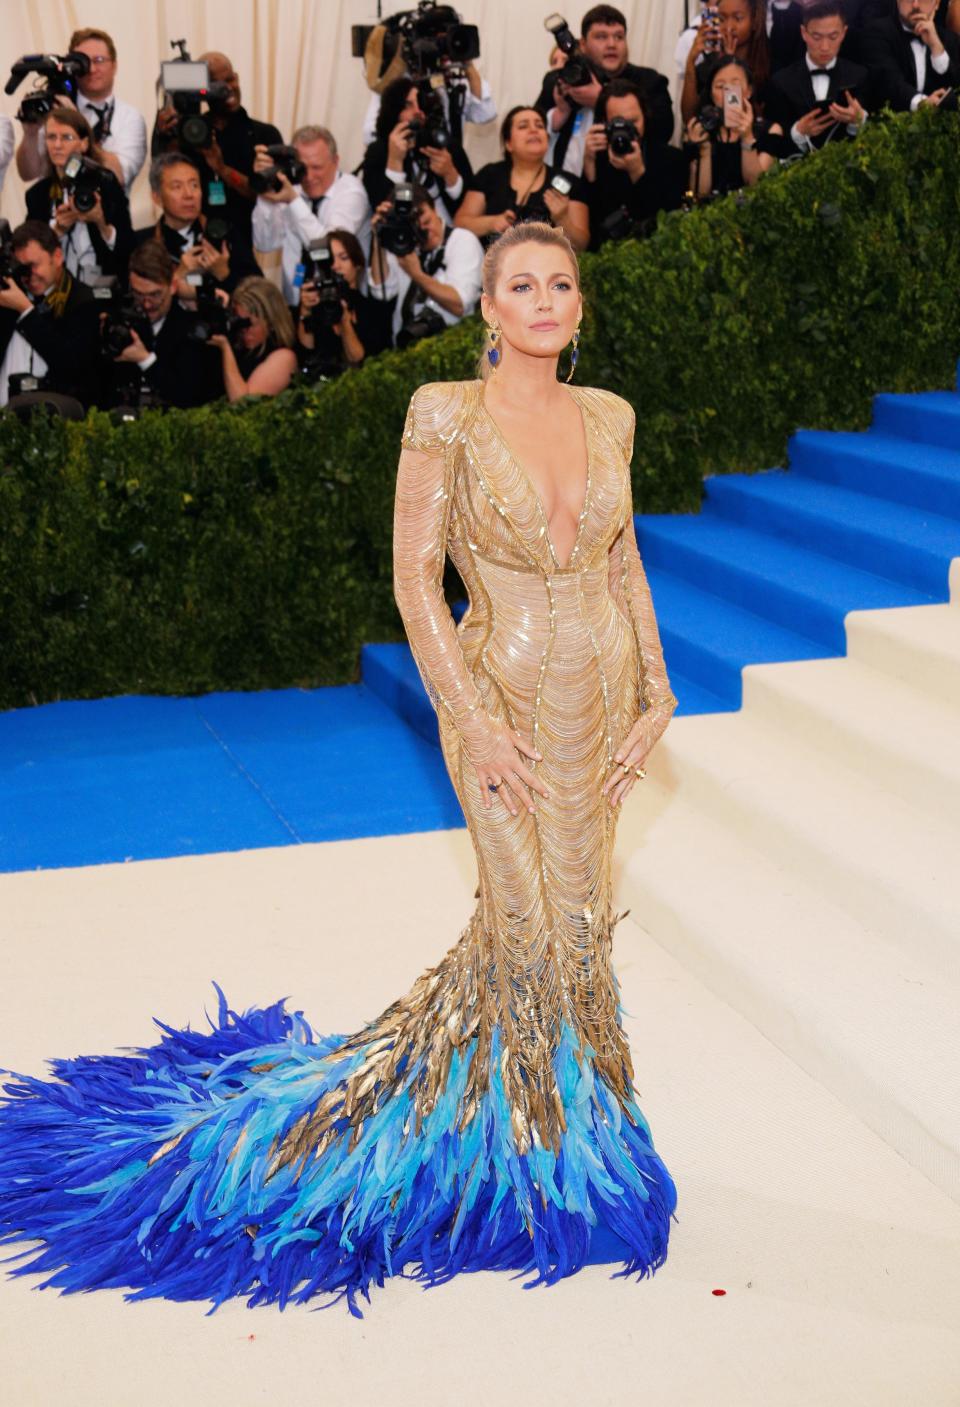 Blake Lively at the 2017 Met Gala in a gold gown with a plunging neckline and blue feathers at the bottom of the skirt.